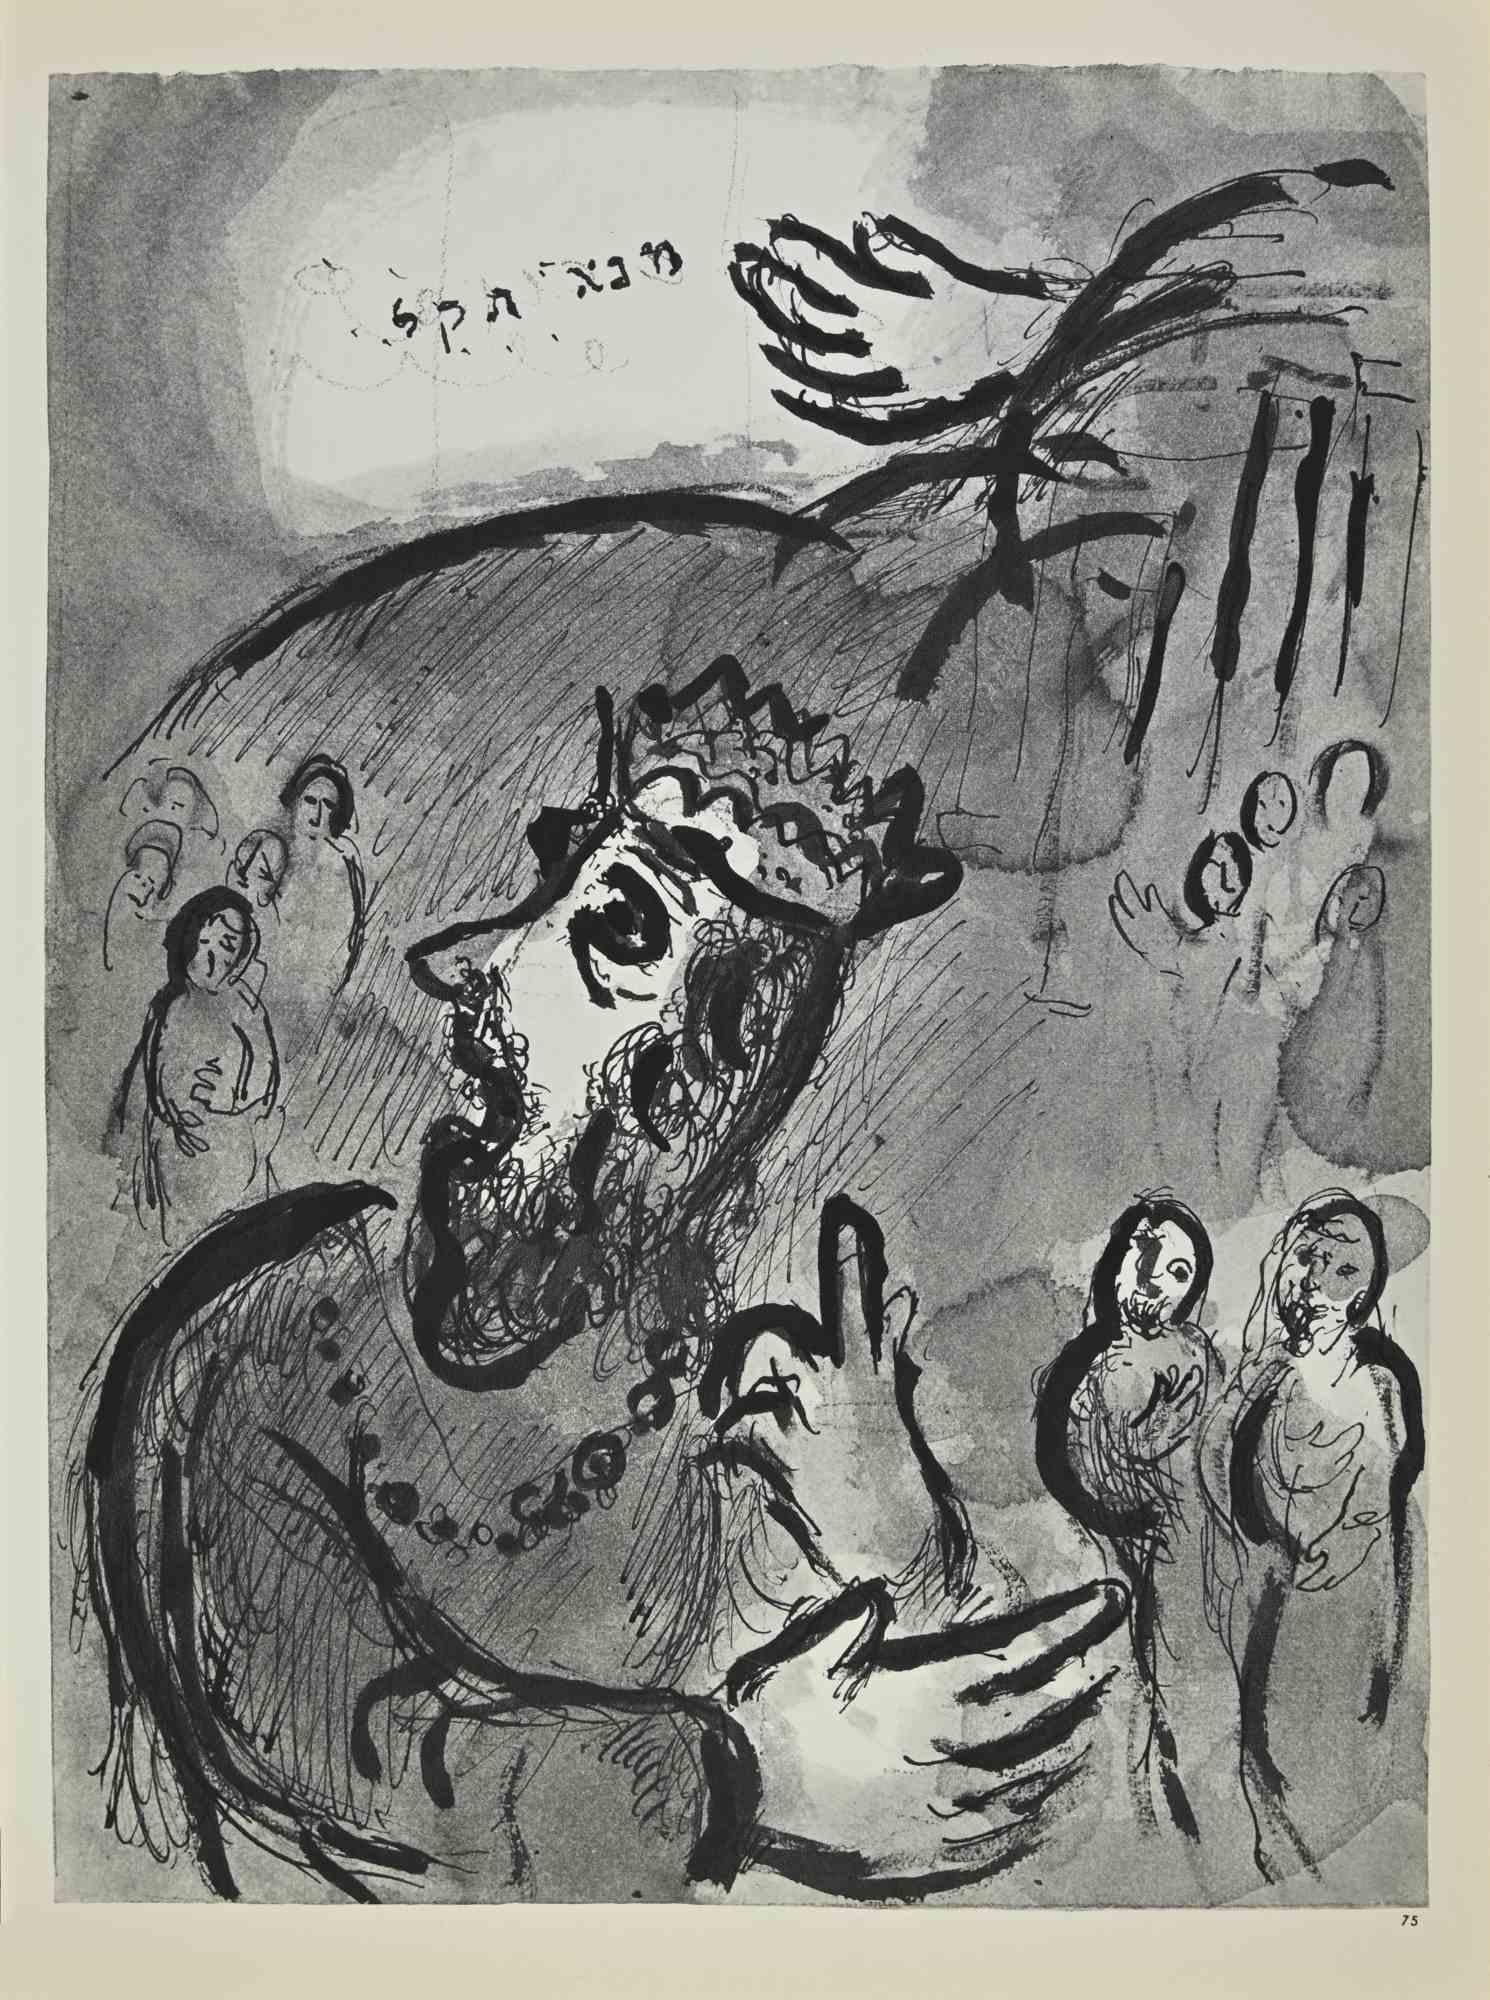 Daniel's Second Vision - Lithograph by Marc Chagall - 1960s